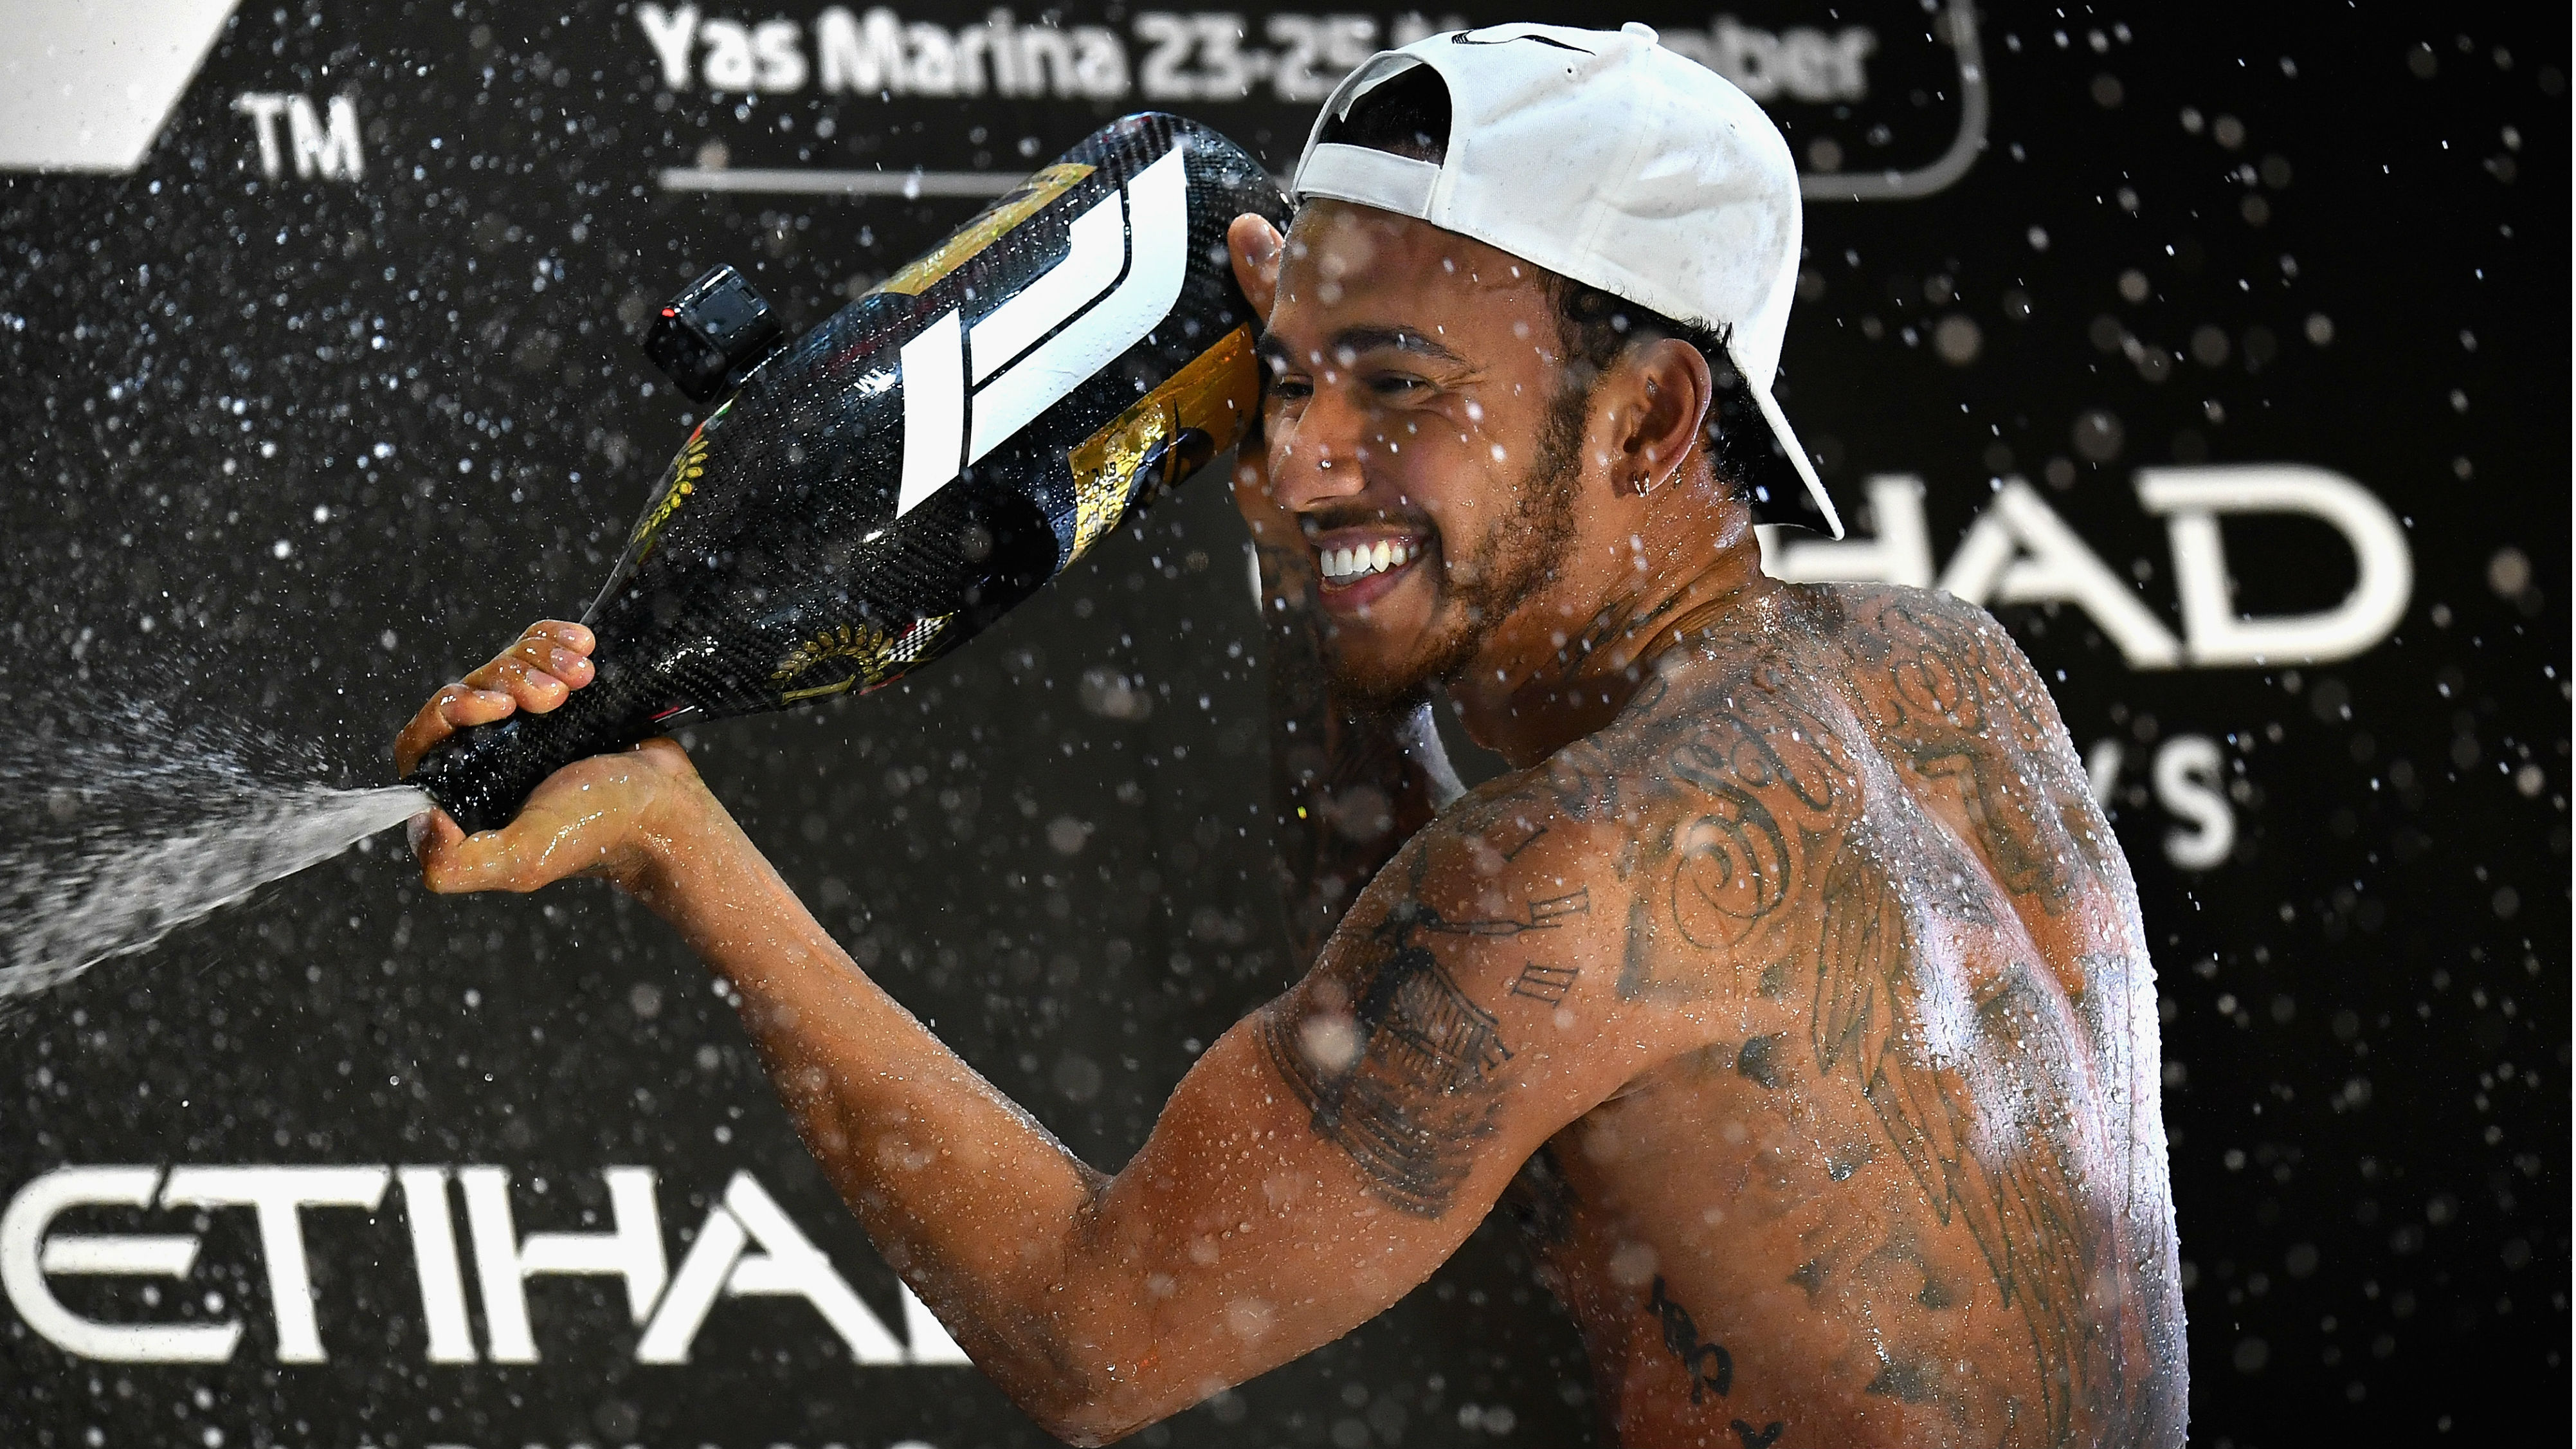 Lewis Hamilton shows off his tattoos after another GP win